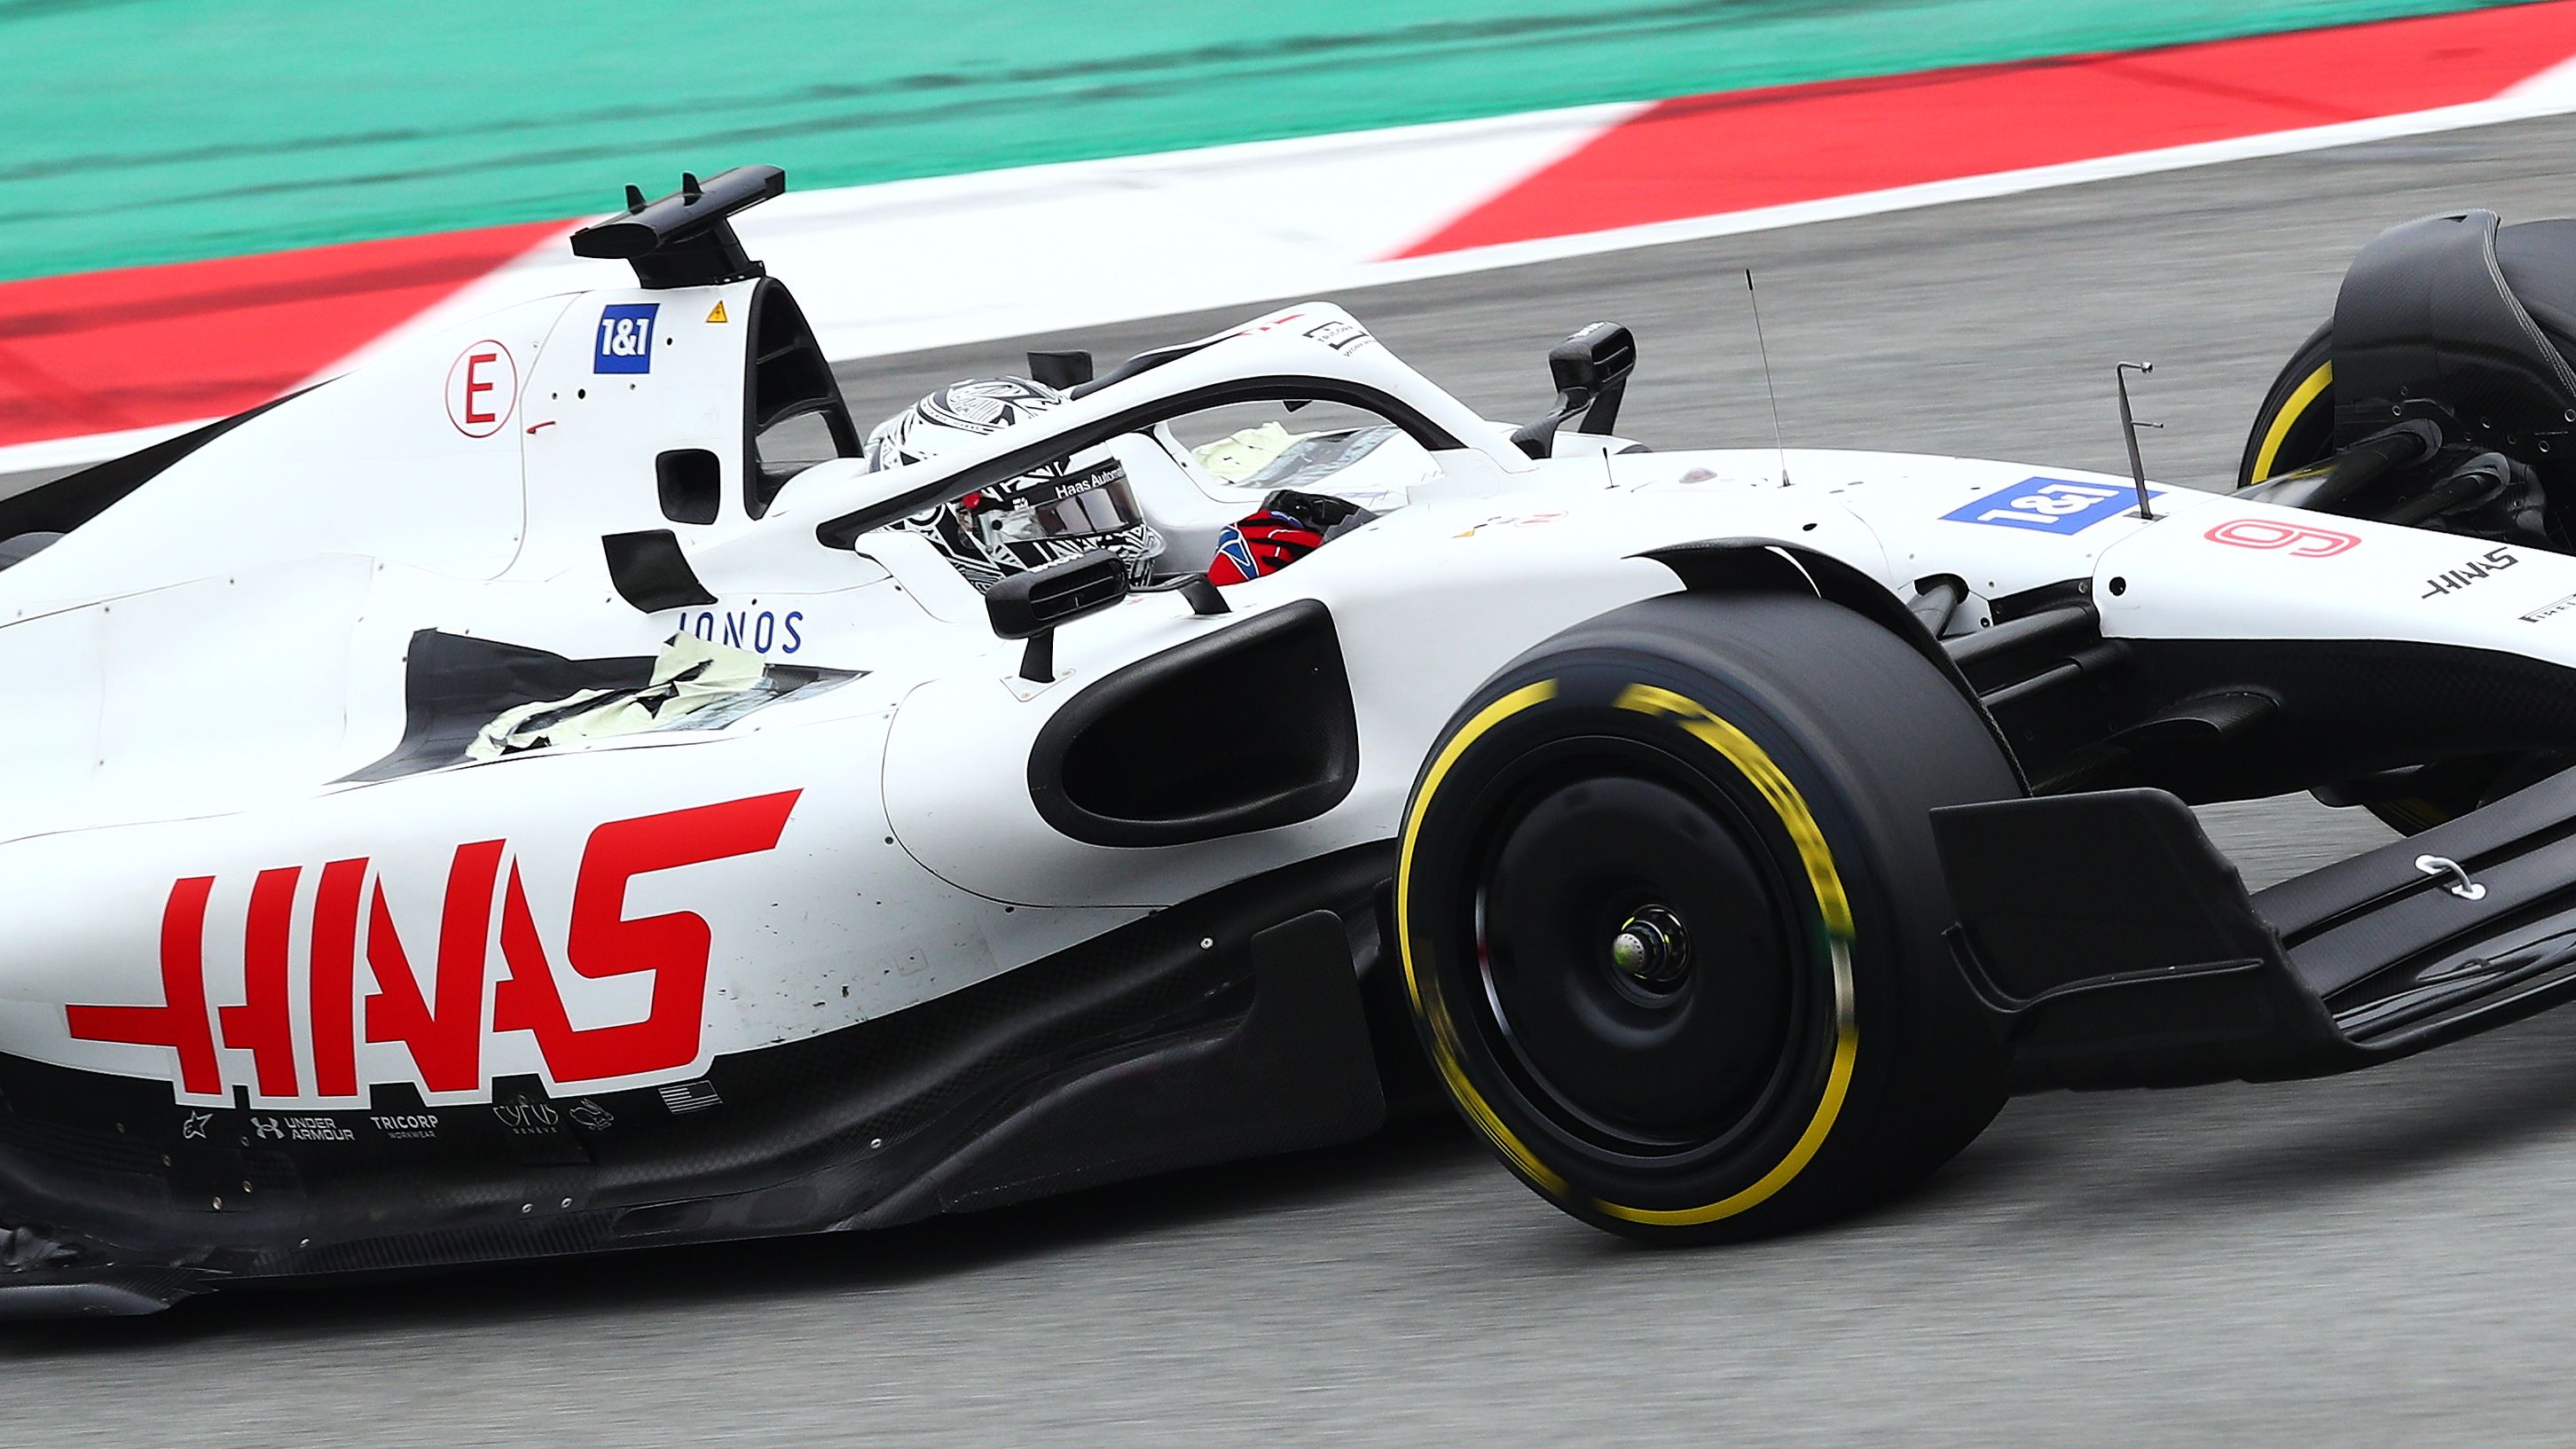 Haas driver Nikita Mazepin banned from competing in British Formula 1 Grand Prix